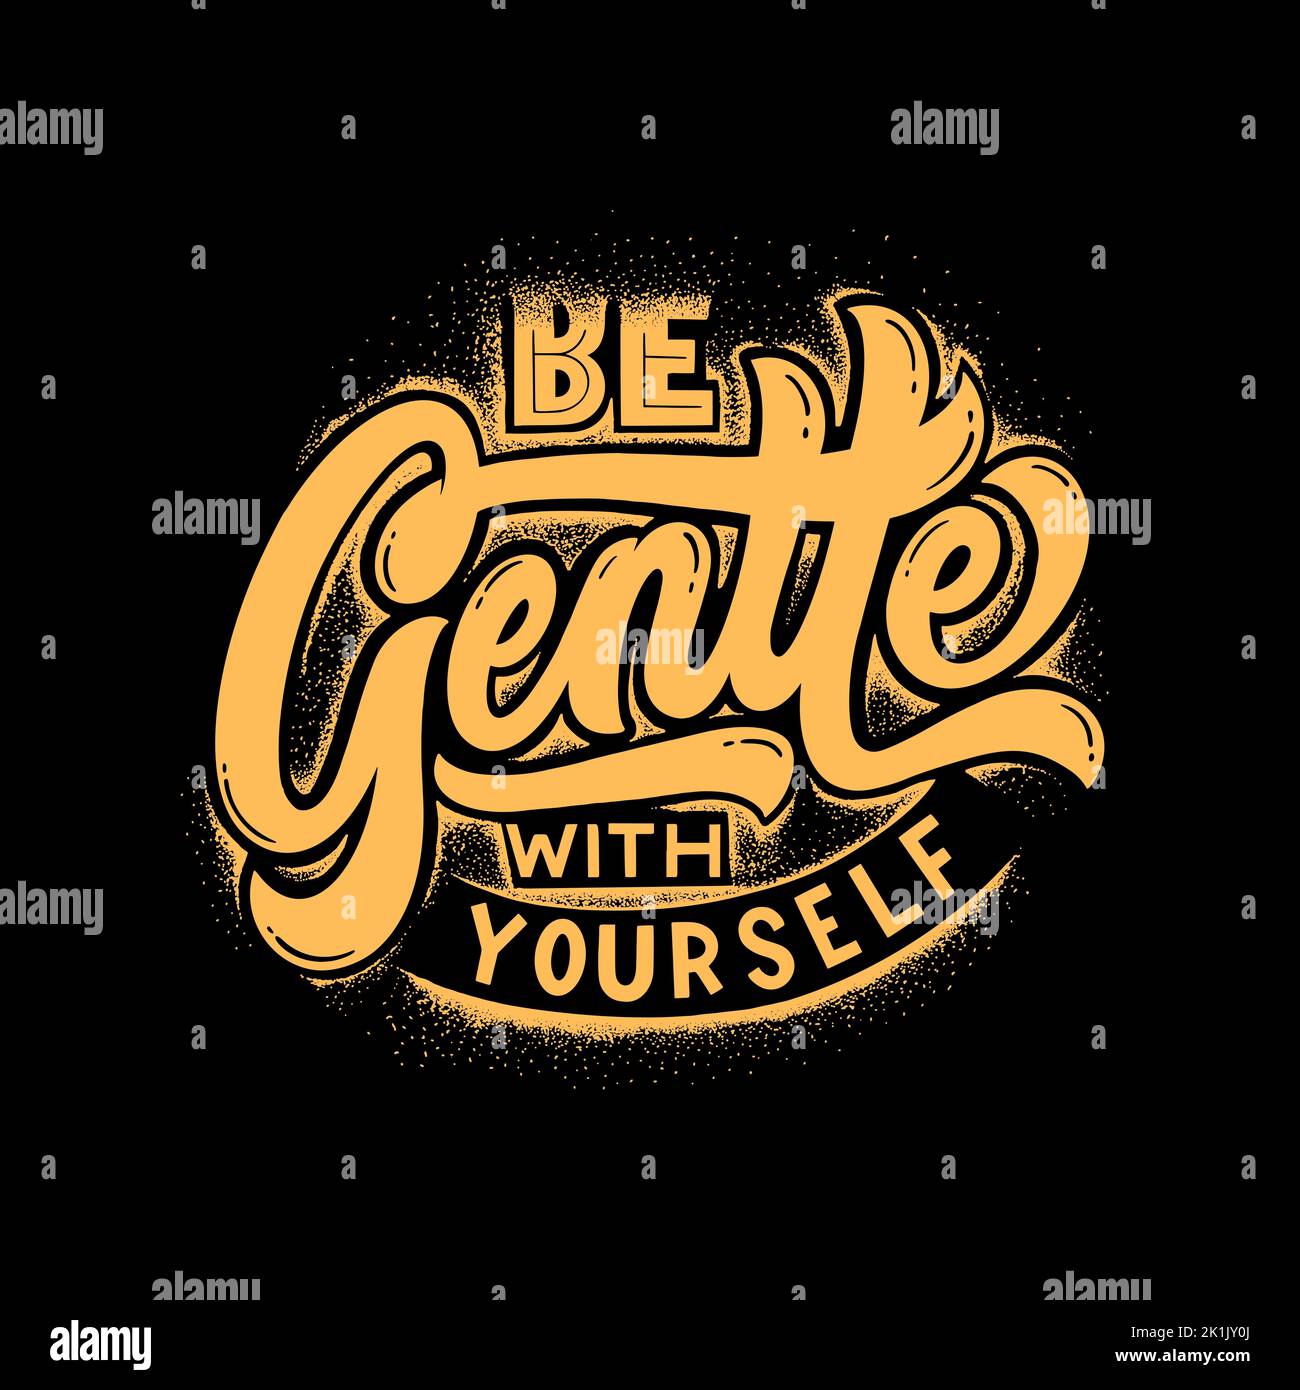 Be gentle with yourself. motivational quote poster on black background Stock Photo